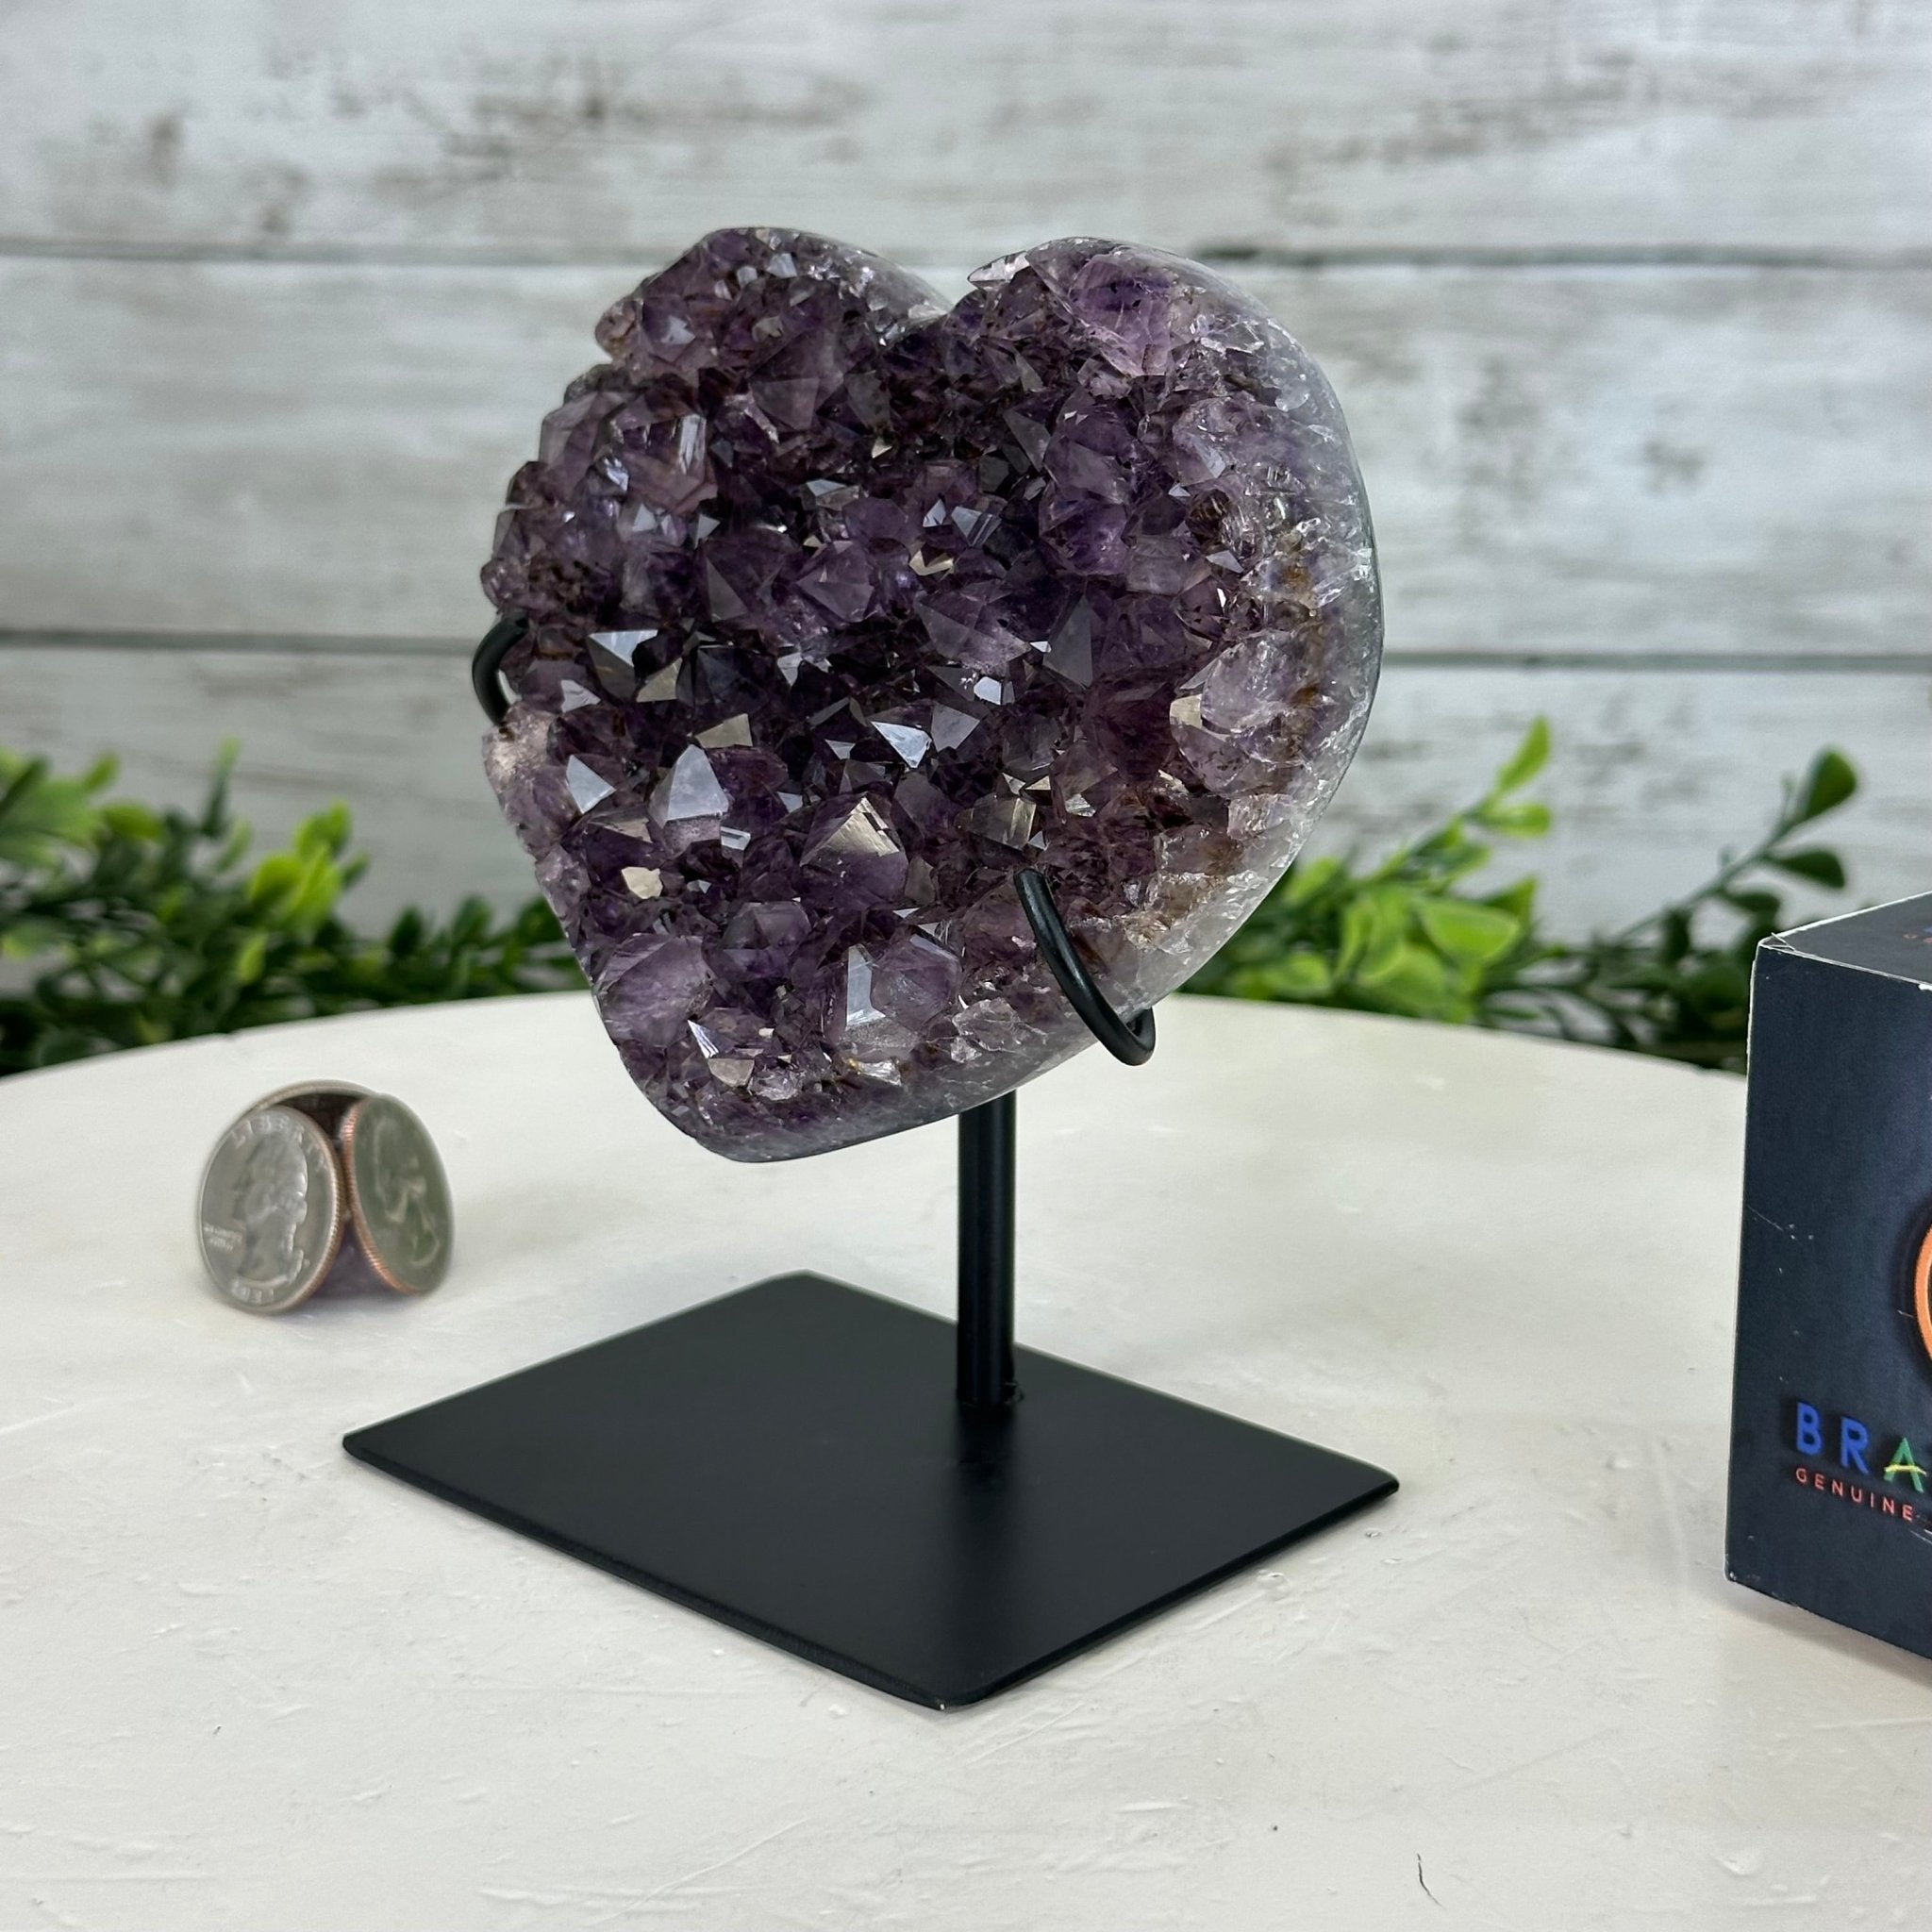 Extra Quality Amethyst Heart Geode w/ metal stand, 1.2 lbs & 5" Tall #5463-0296 - Brazil GemsBrazil GemsExtra Quality Amethyst Heart Geode w/ metal stand, 1.2 lbs & 5" Tall #5463-0296Hearts5463-0296